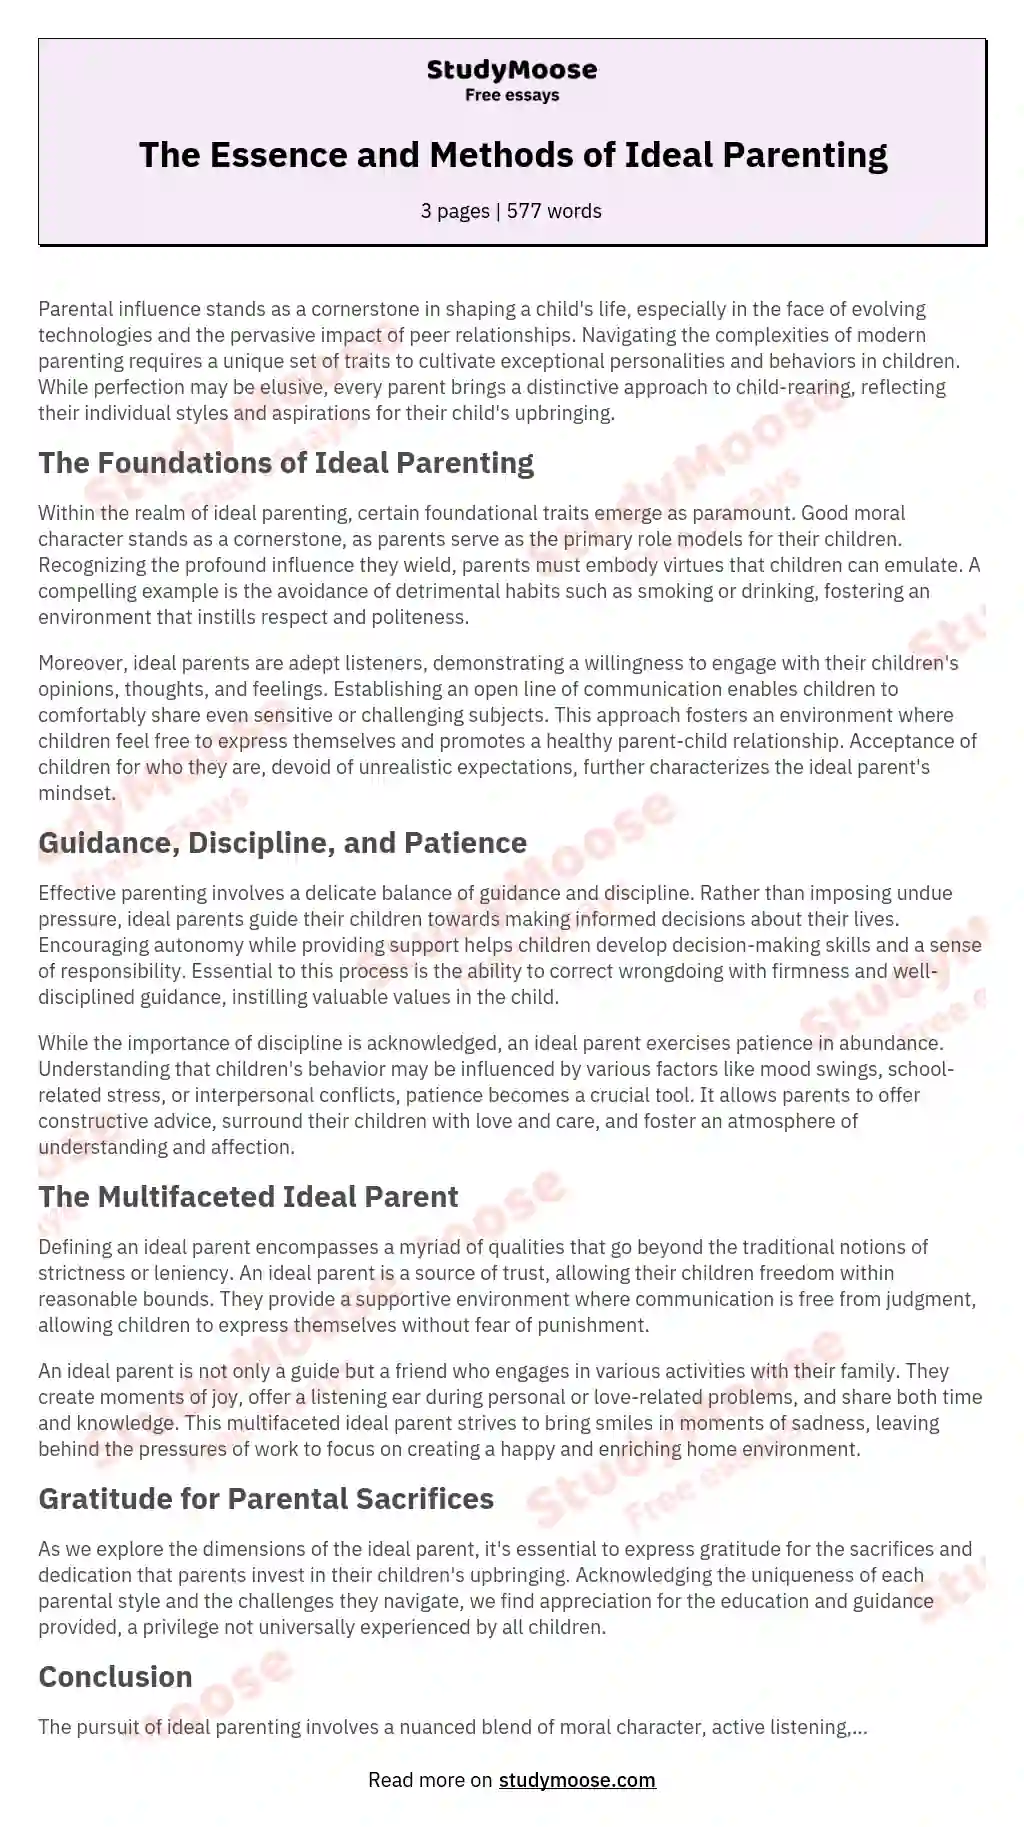 The Essence and Methods of Ideal Parenting essay